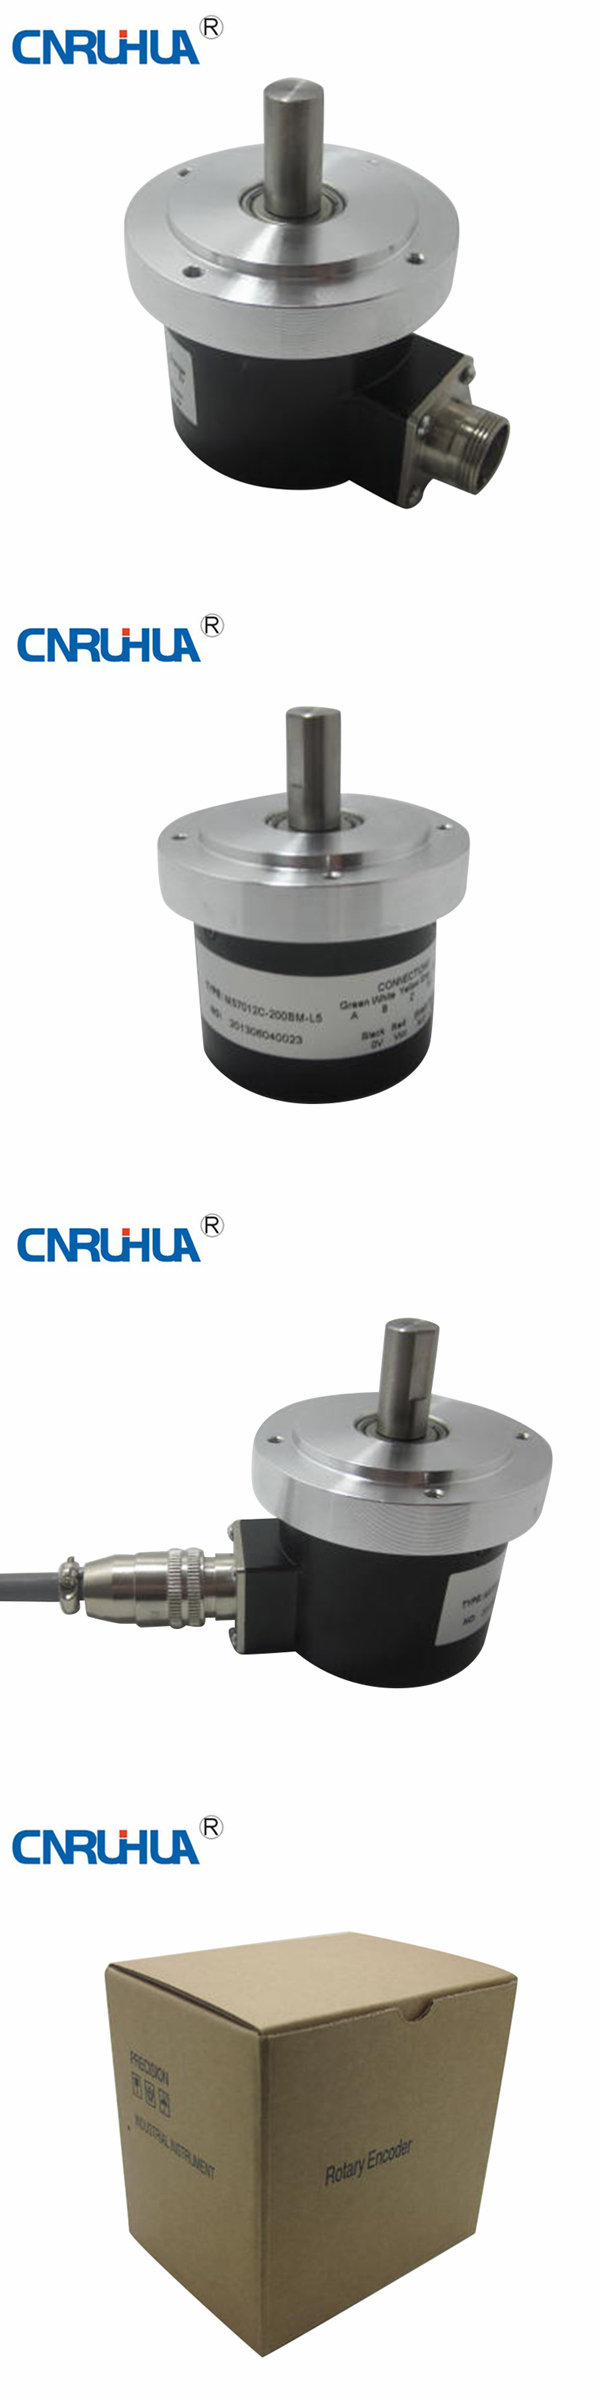 Whole Sales 38mm Rotary Encoder